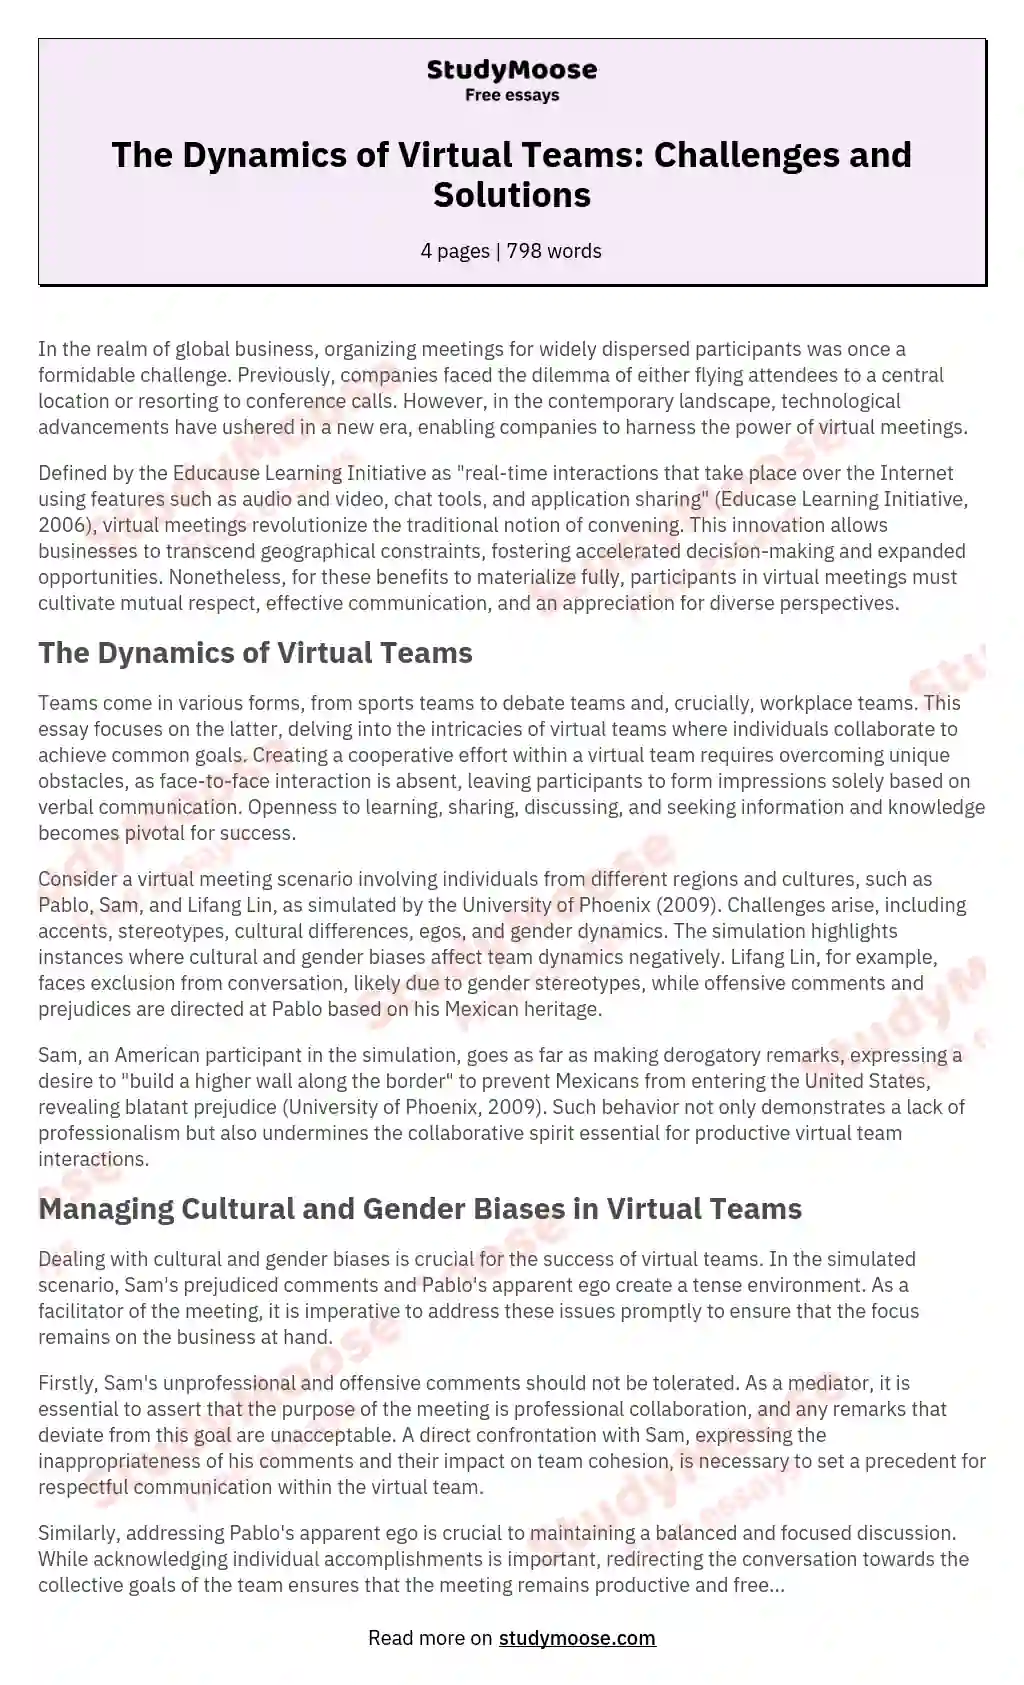 The Dynamics of Virtual Teams: Challenges and Solutions essay